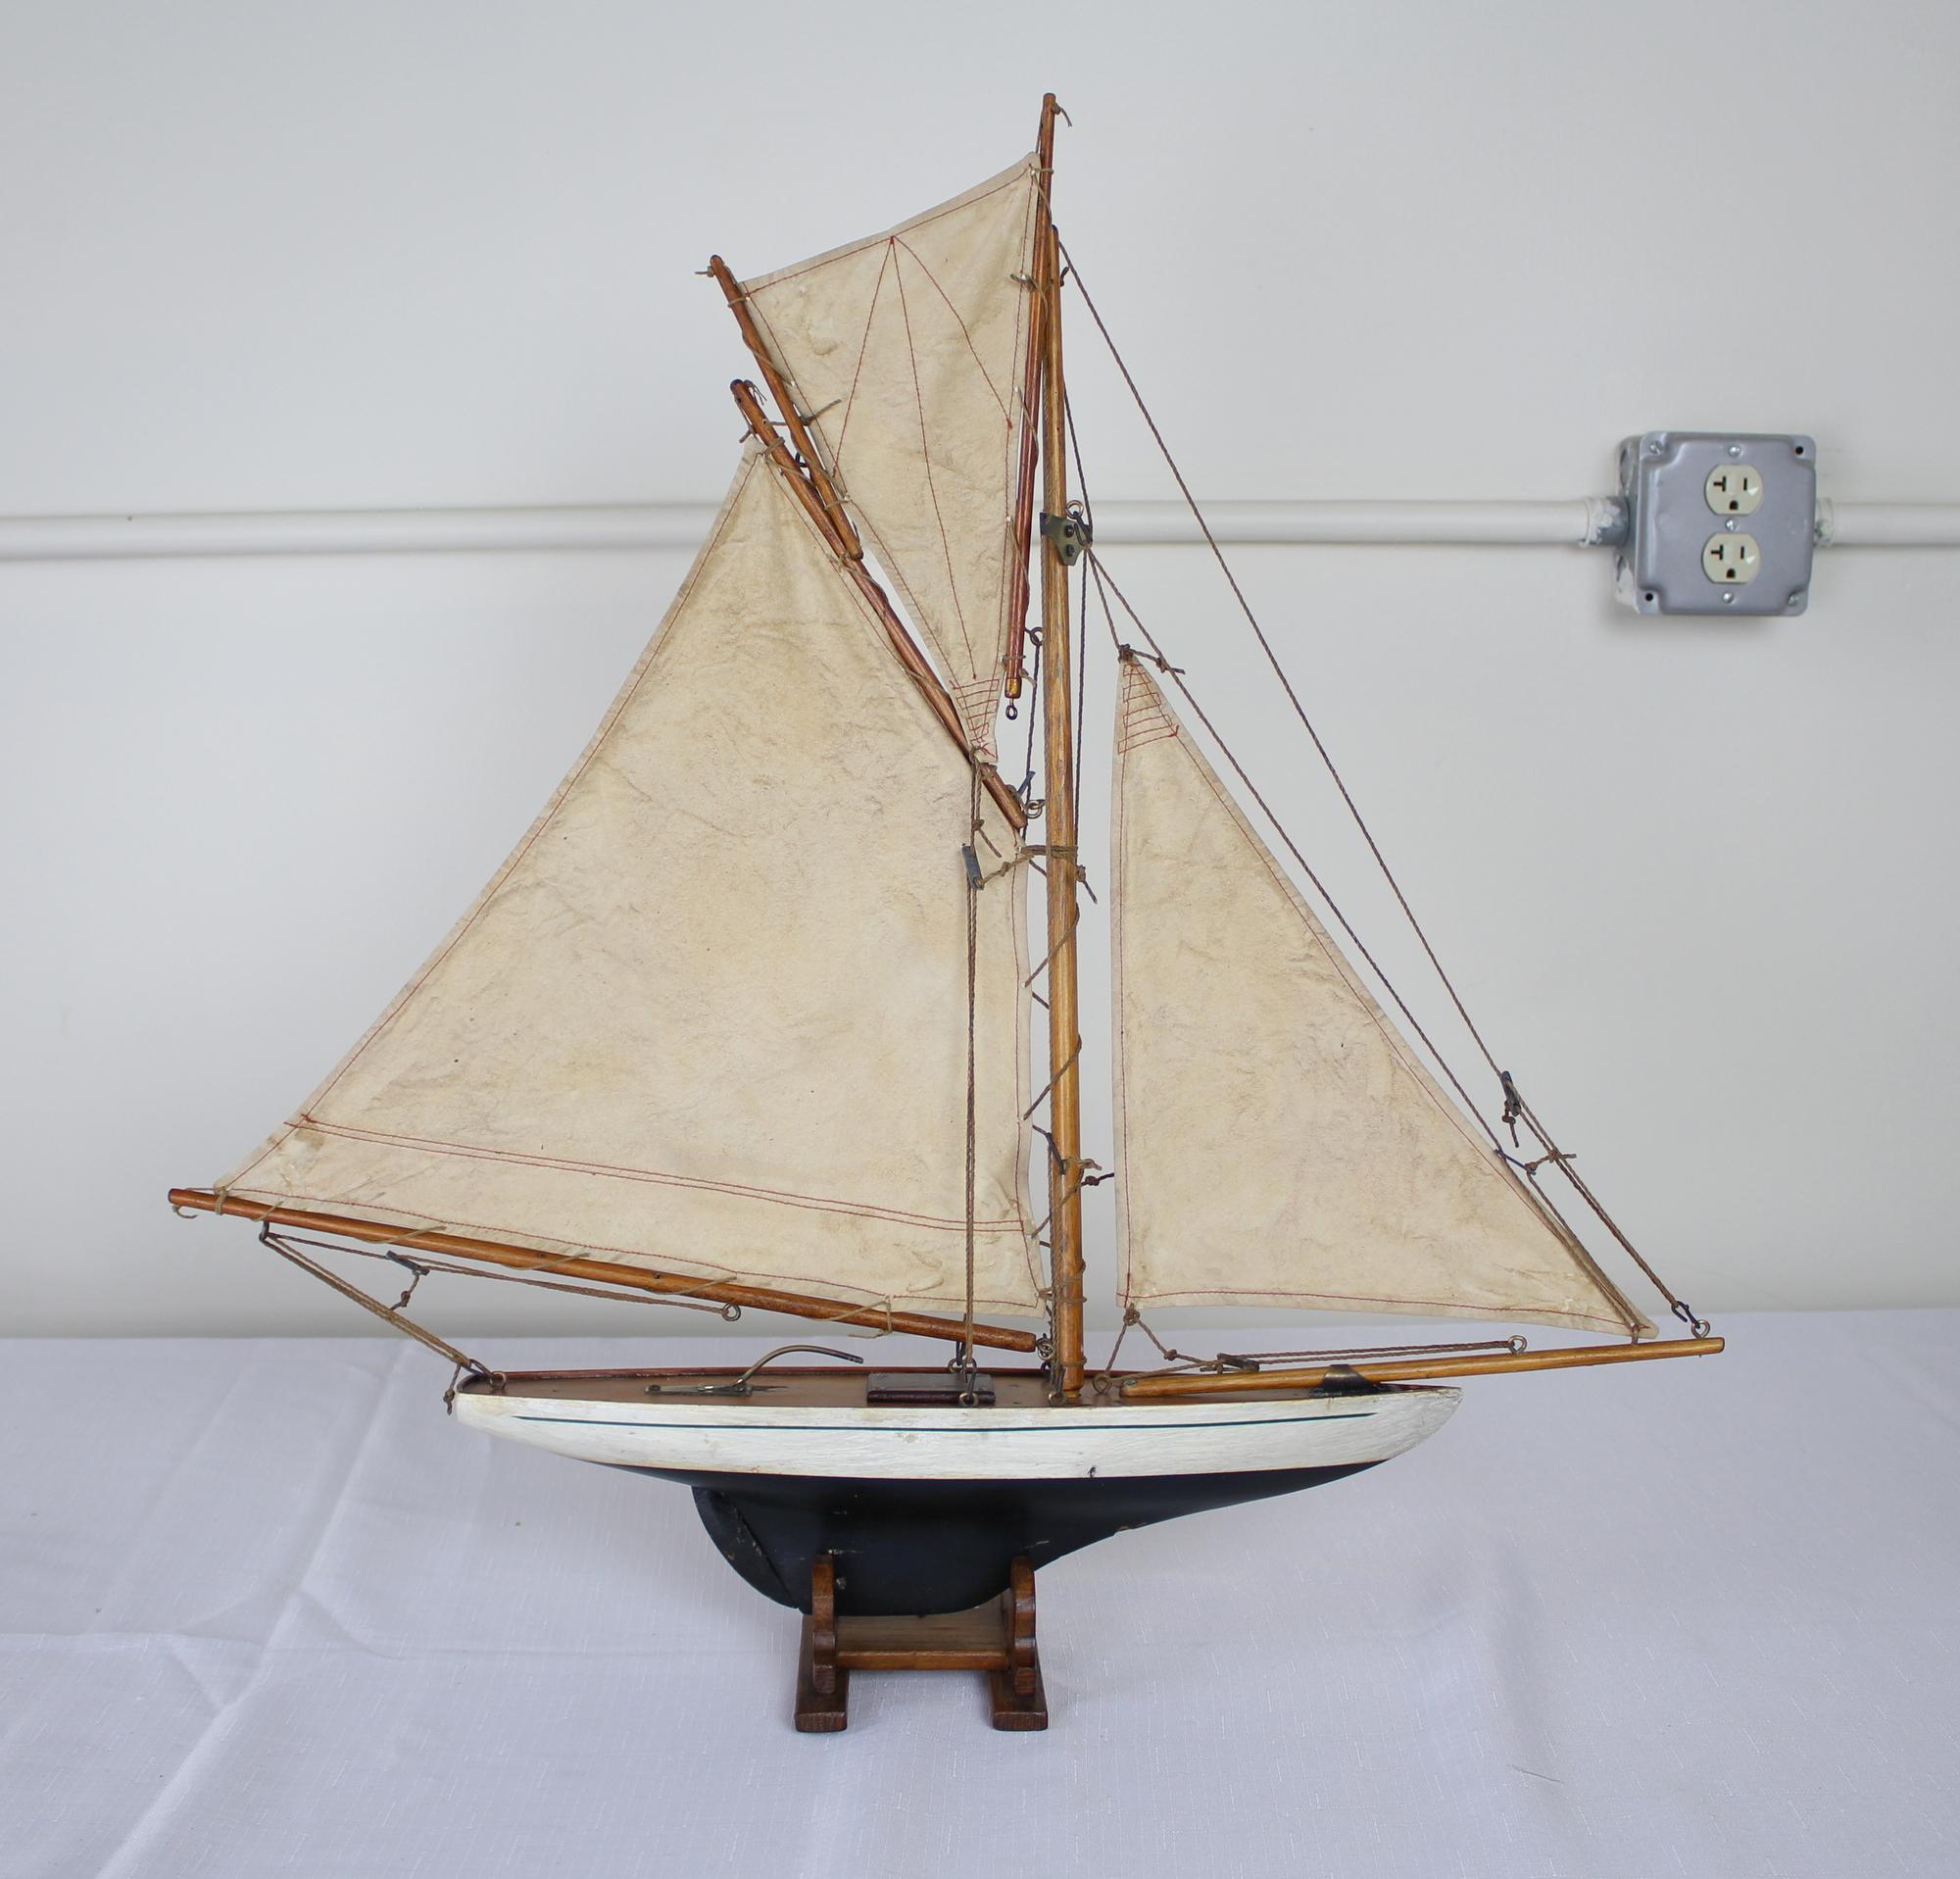 A charming vintage model yacht with sails made from old sail cloth and original brass accents. Stand is recent to hold the ship upright and stabile.